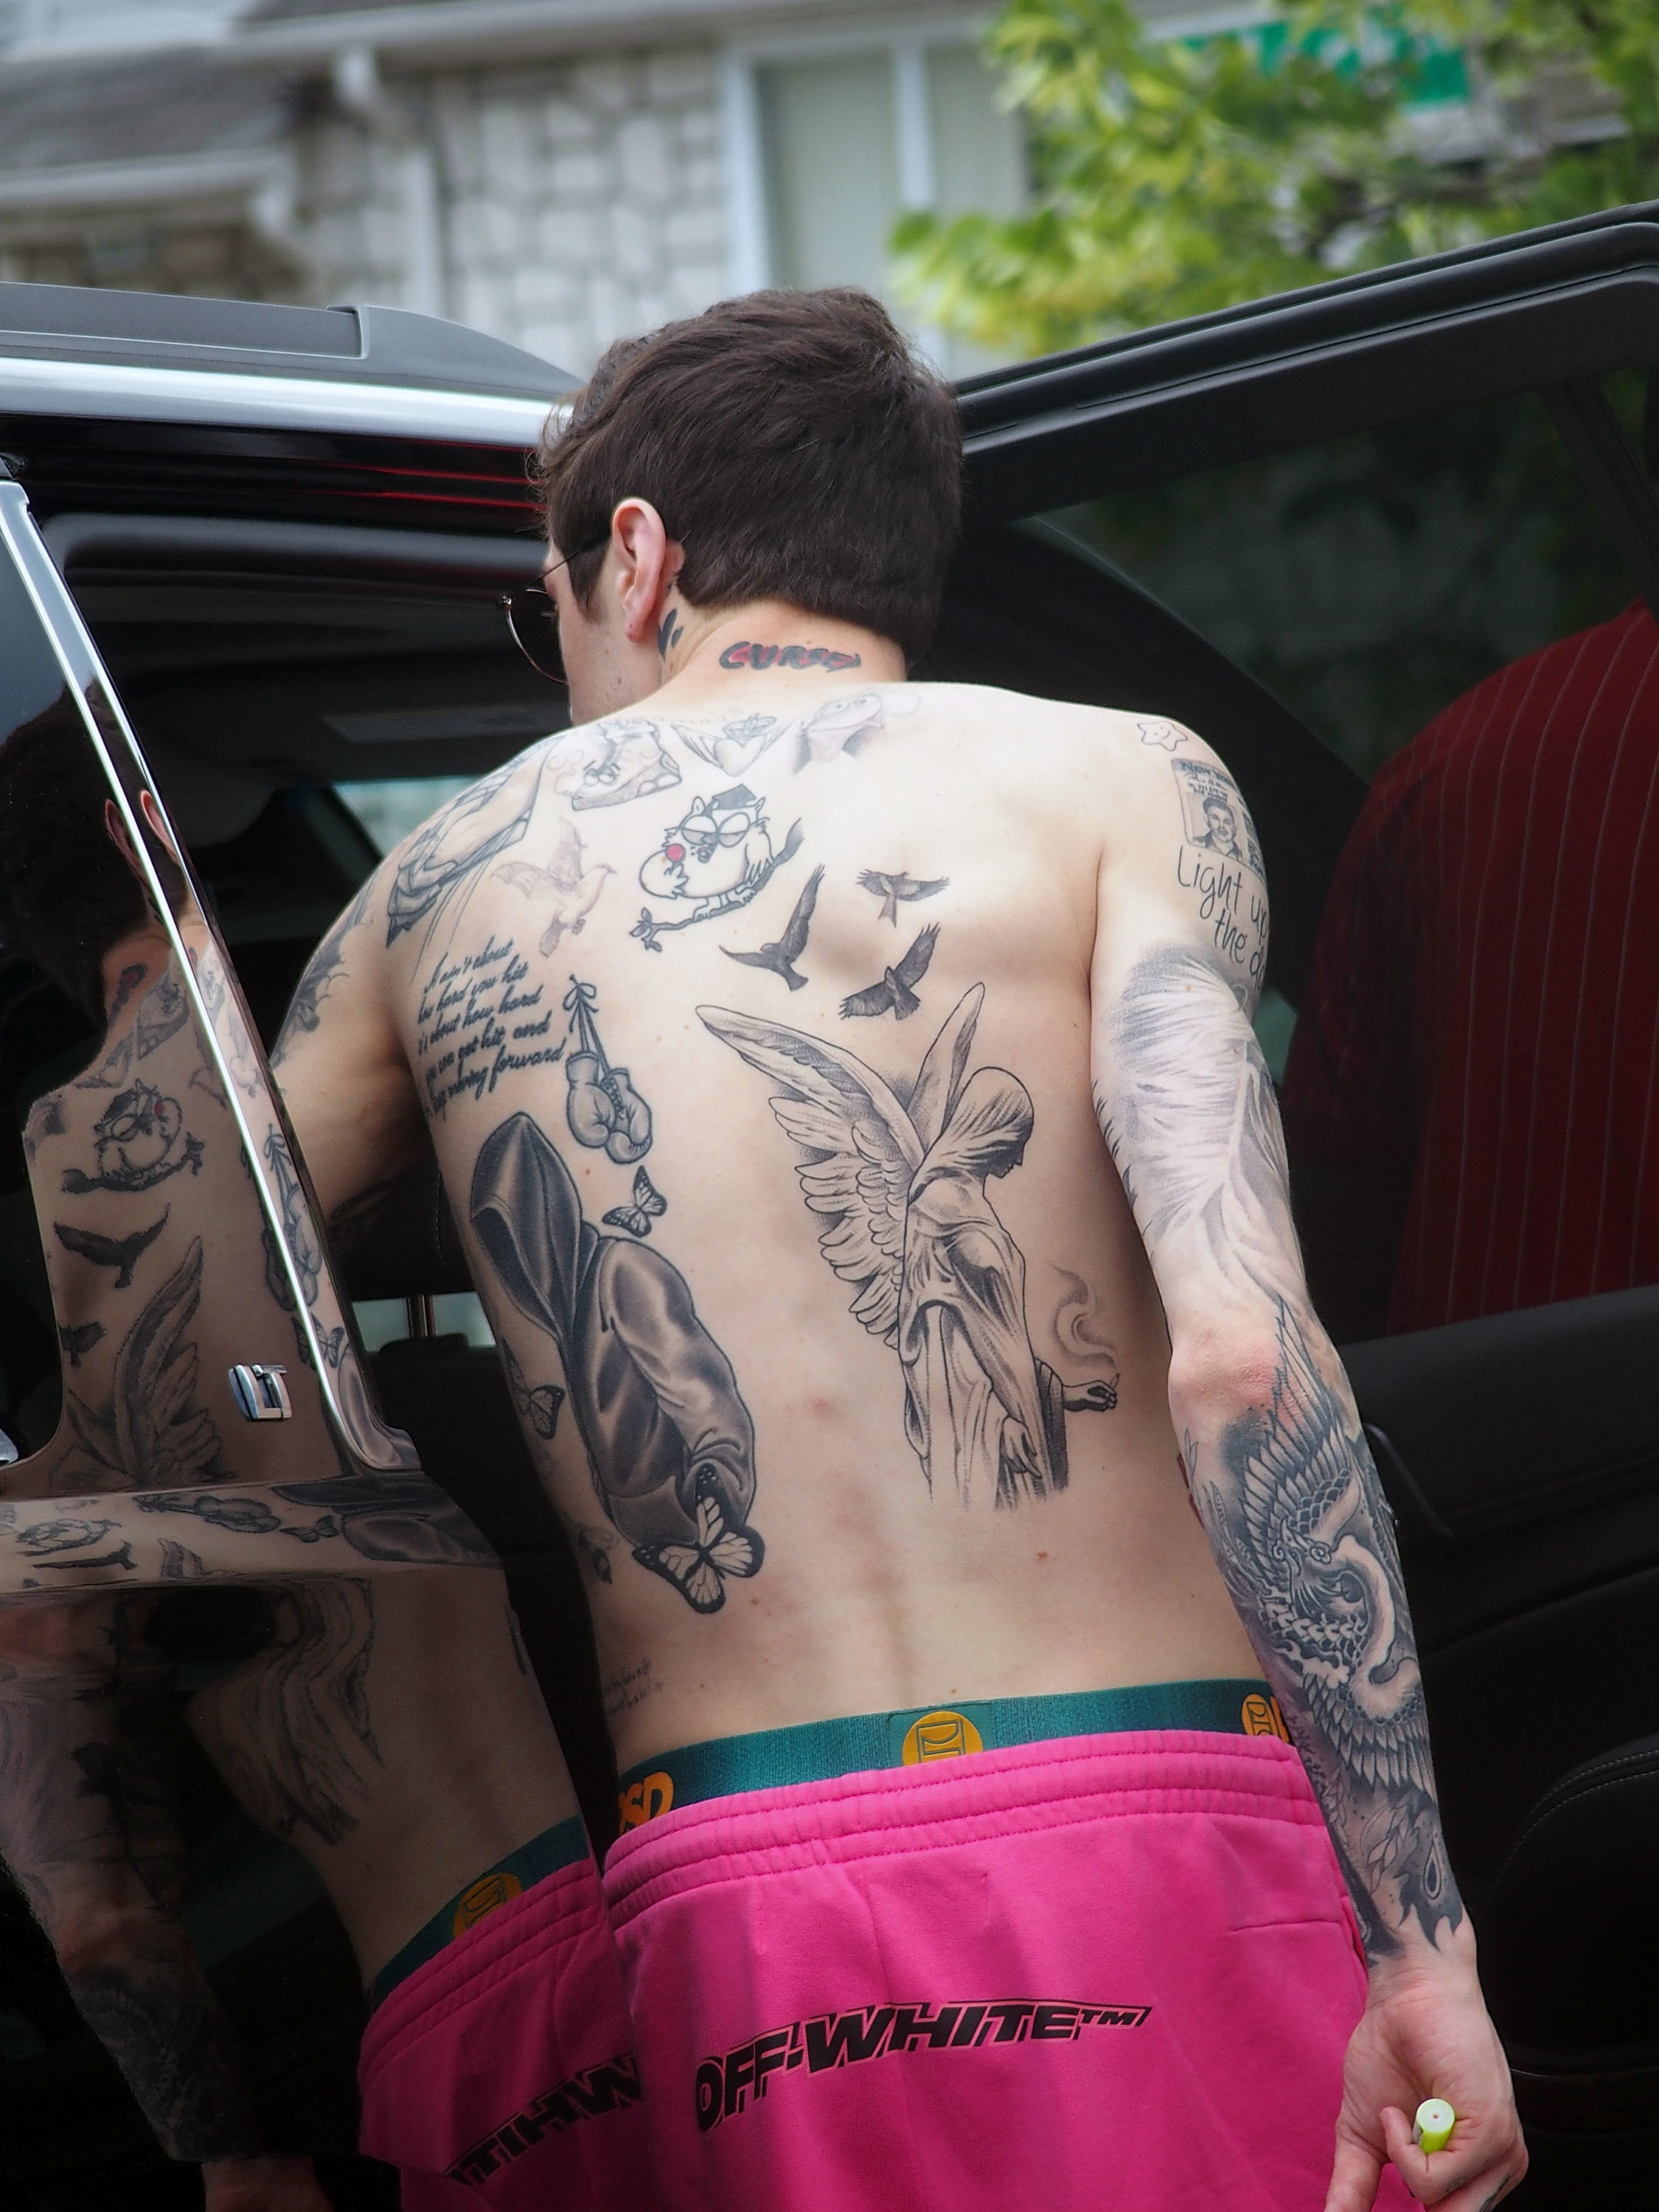 A photo of Pete shirtless from the back